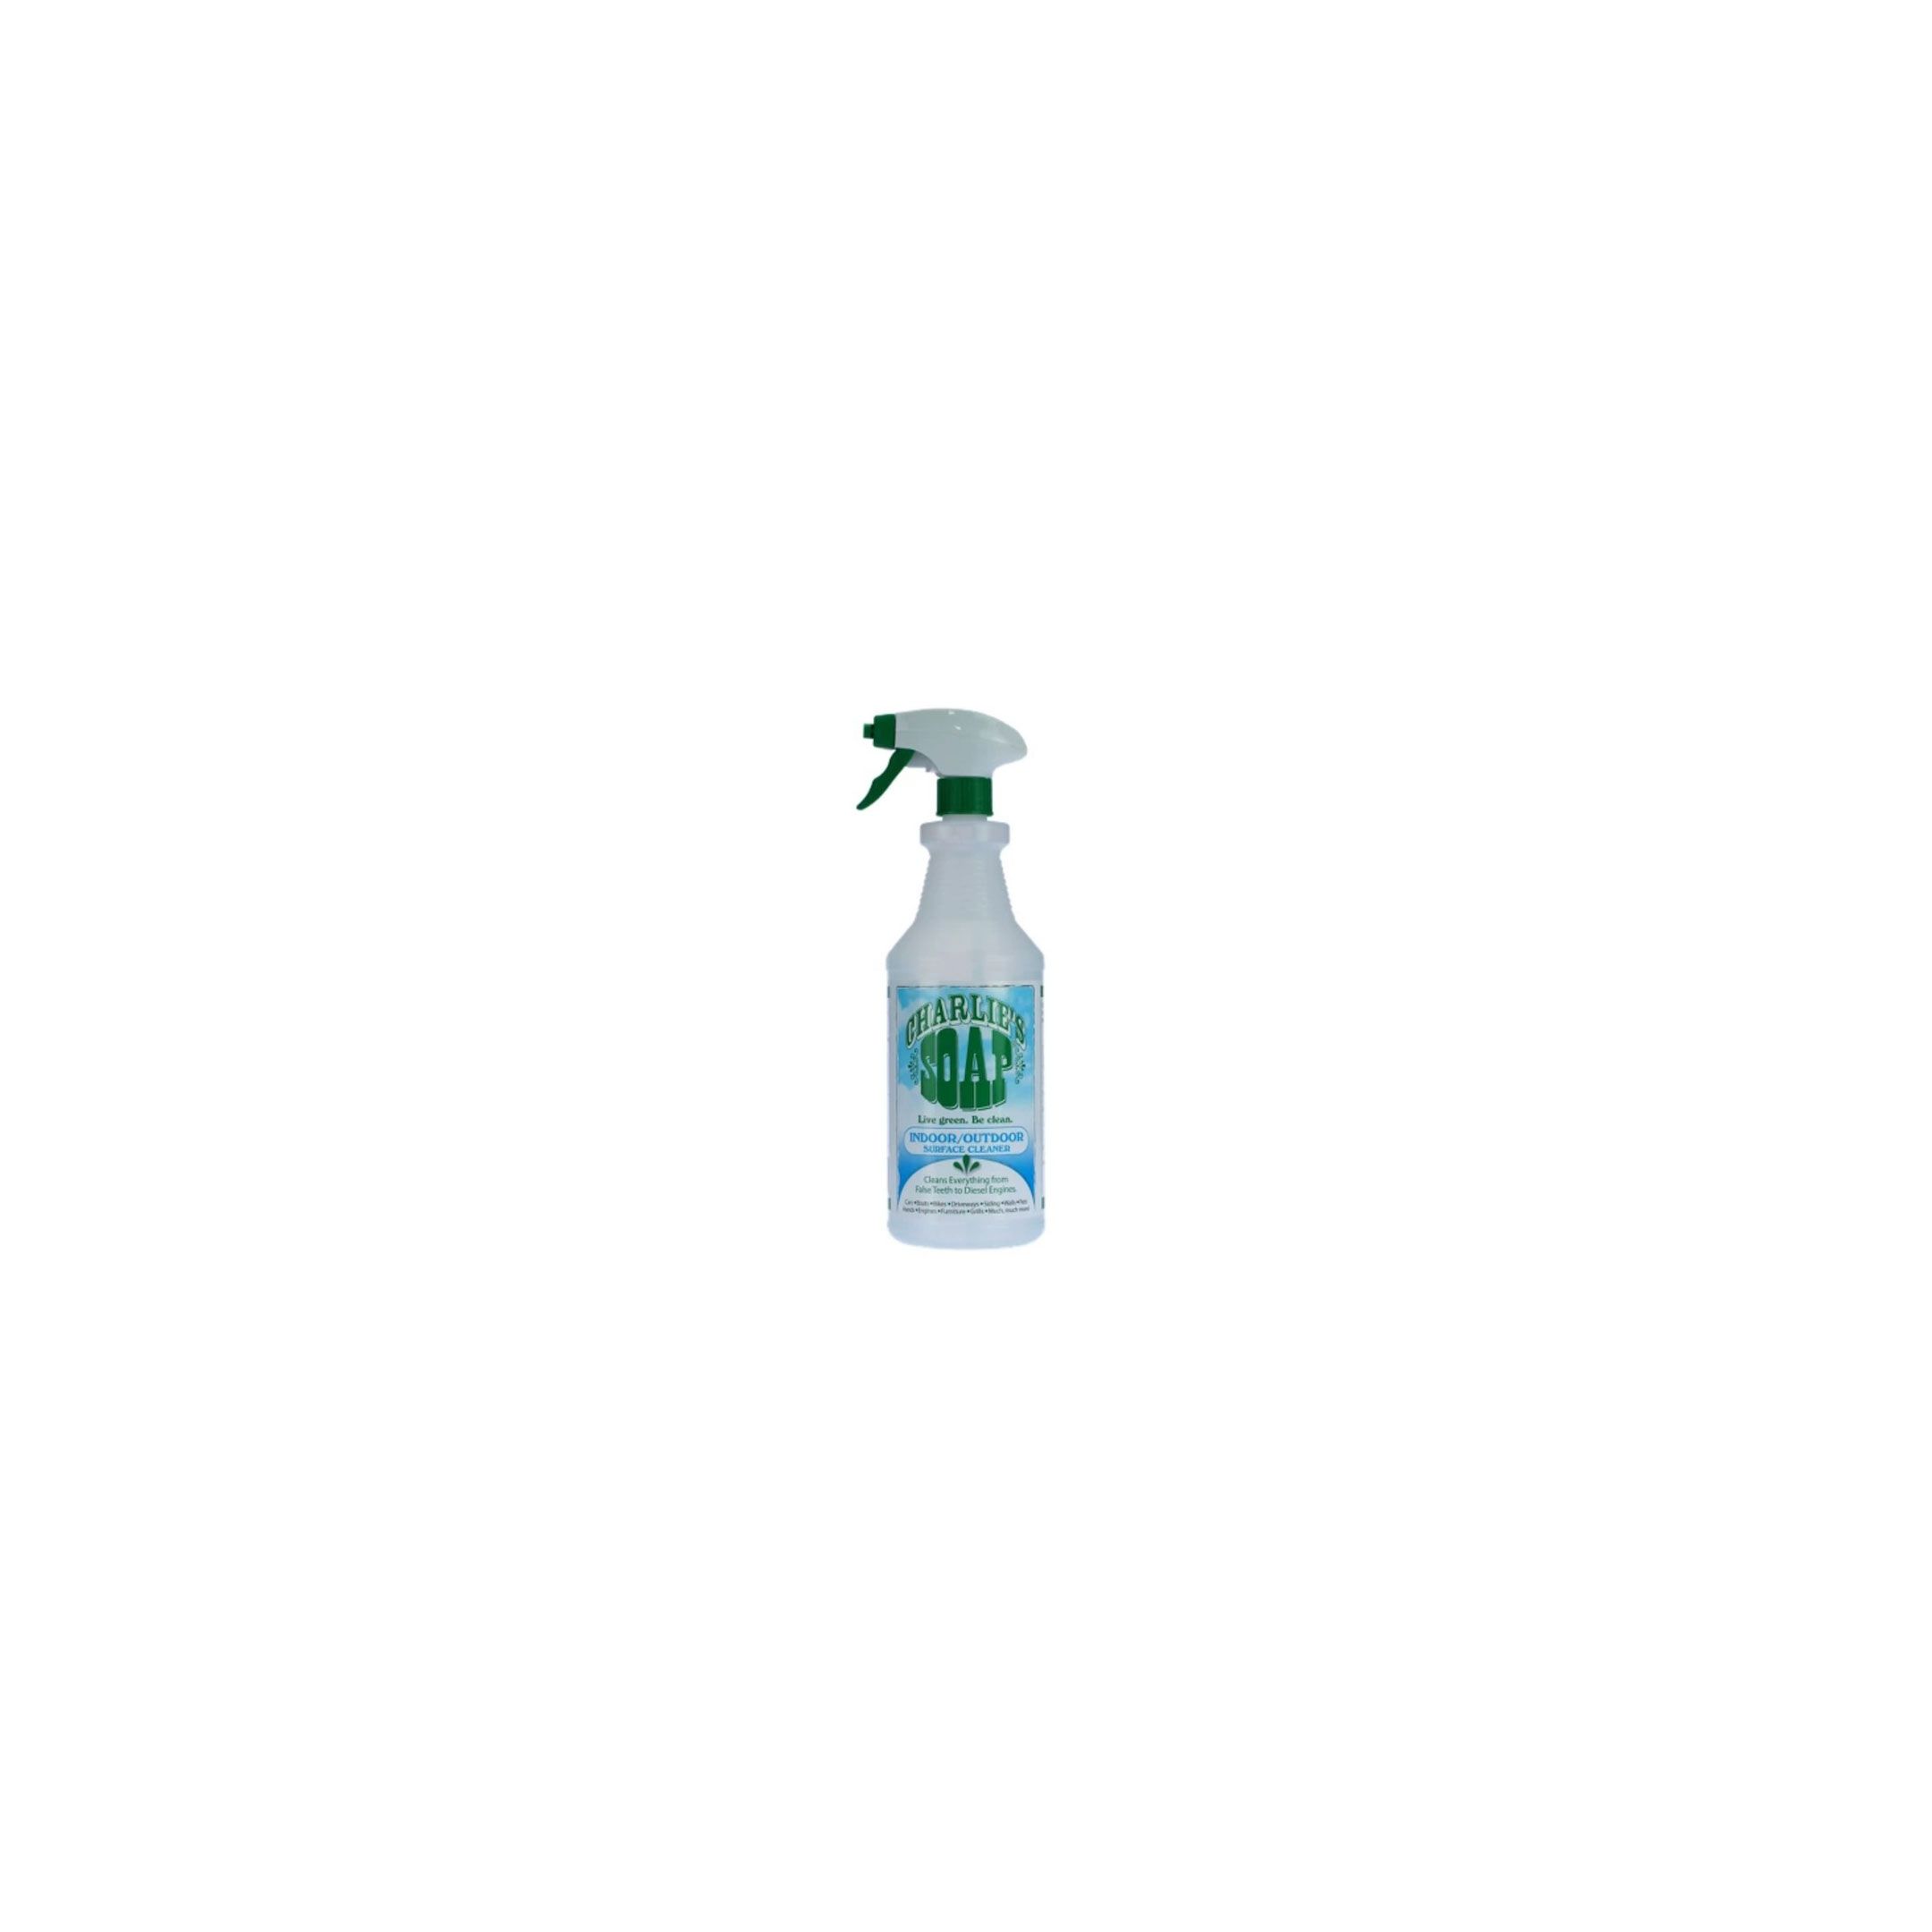 Charlie’s Soap Indoor and Outdoor Surface Cleaner